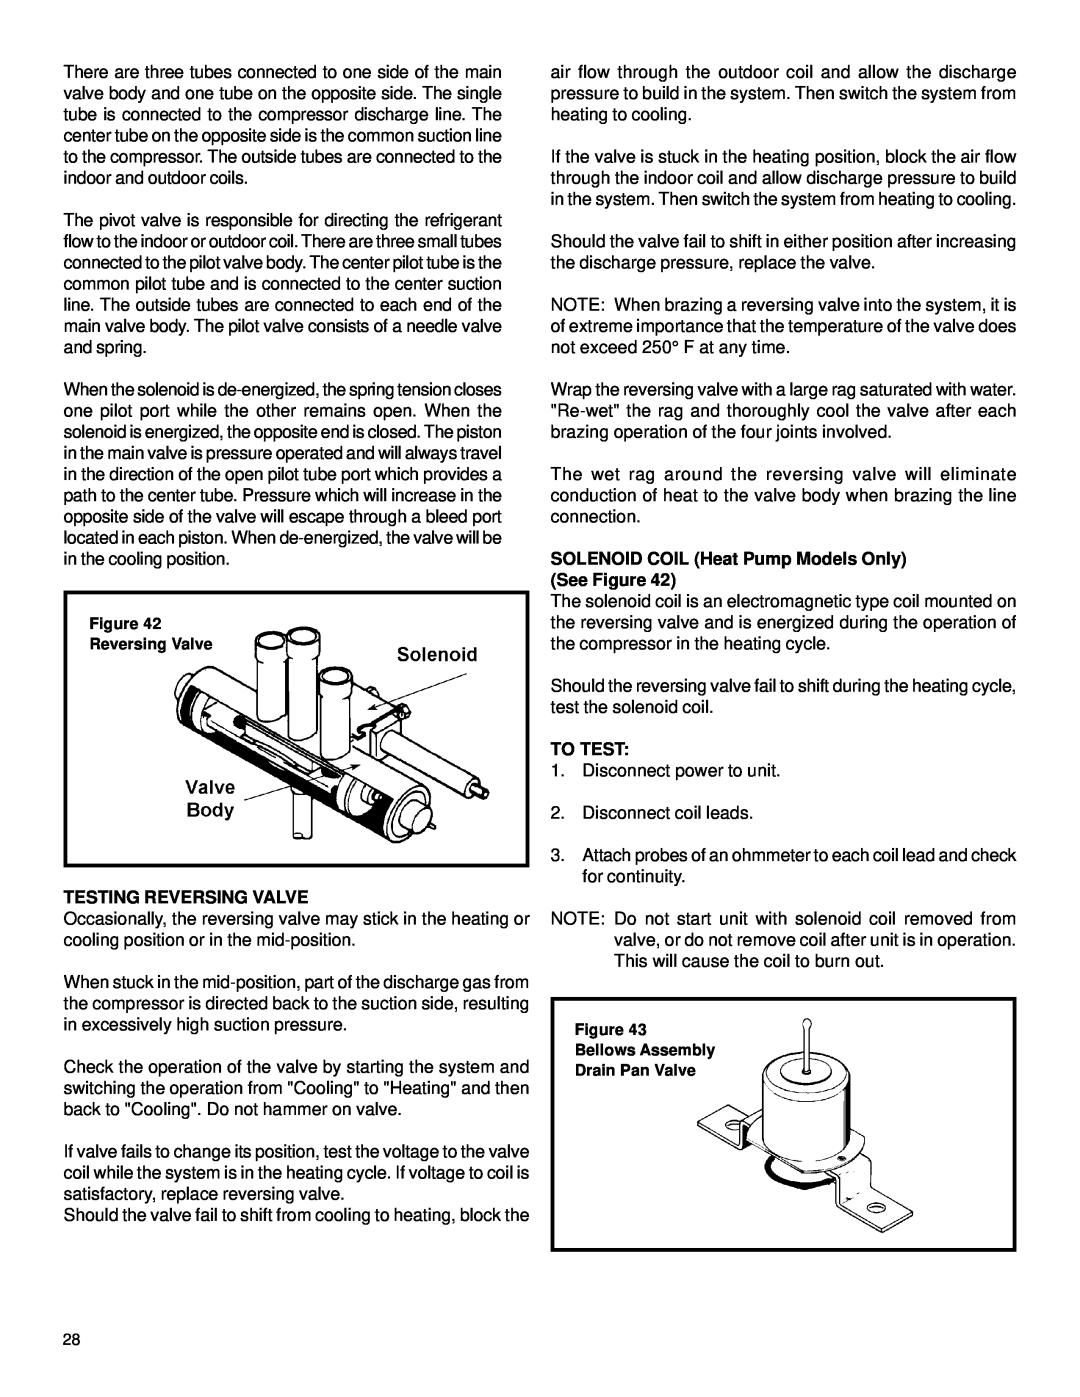 Friedrich 2003 service manual Testing Reversing Valve, SOLENOID COIL Heat Pump Models Only See Figure, To Test 